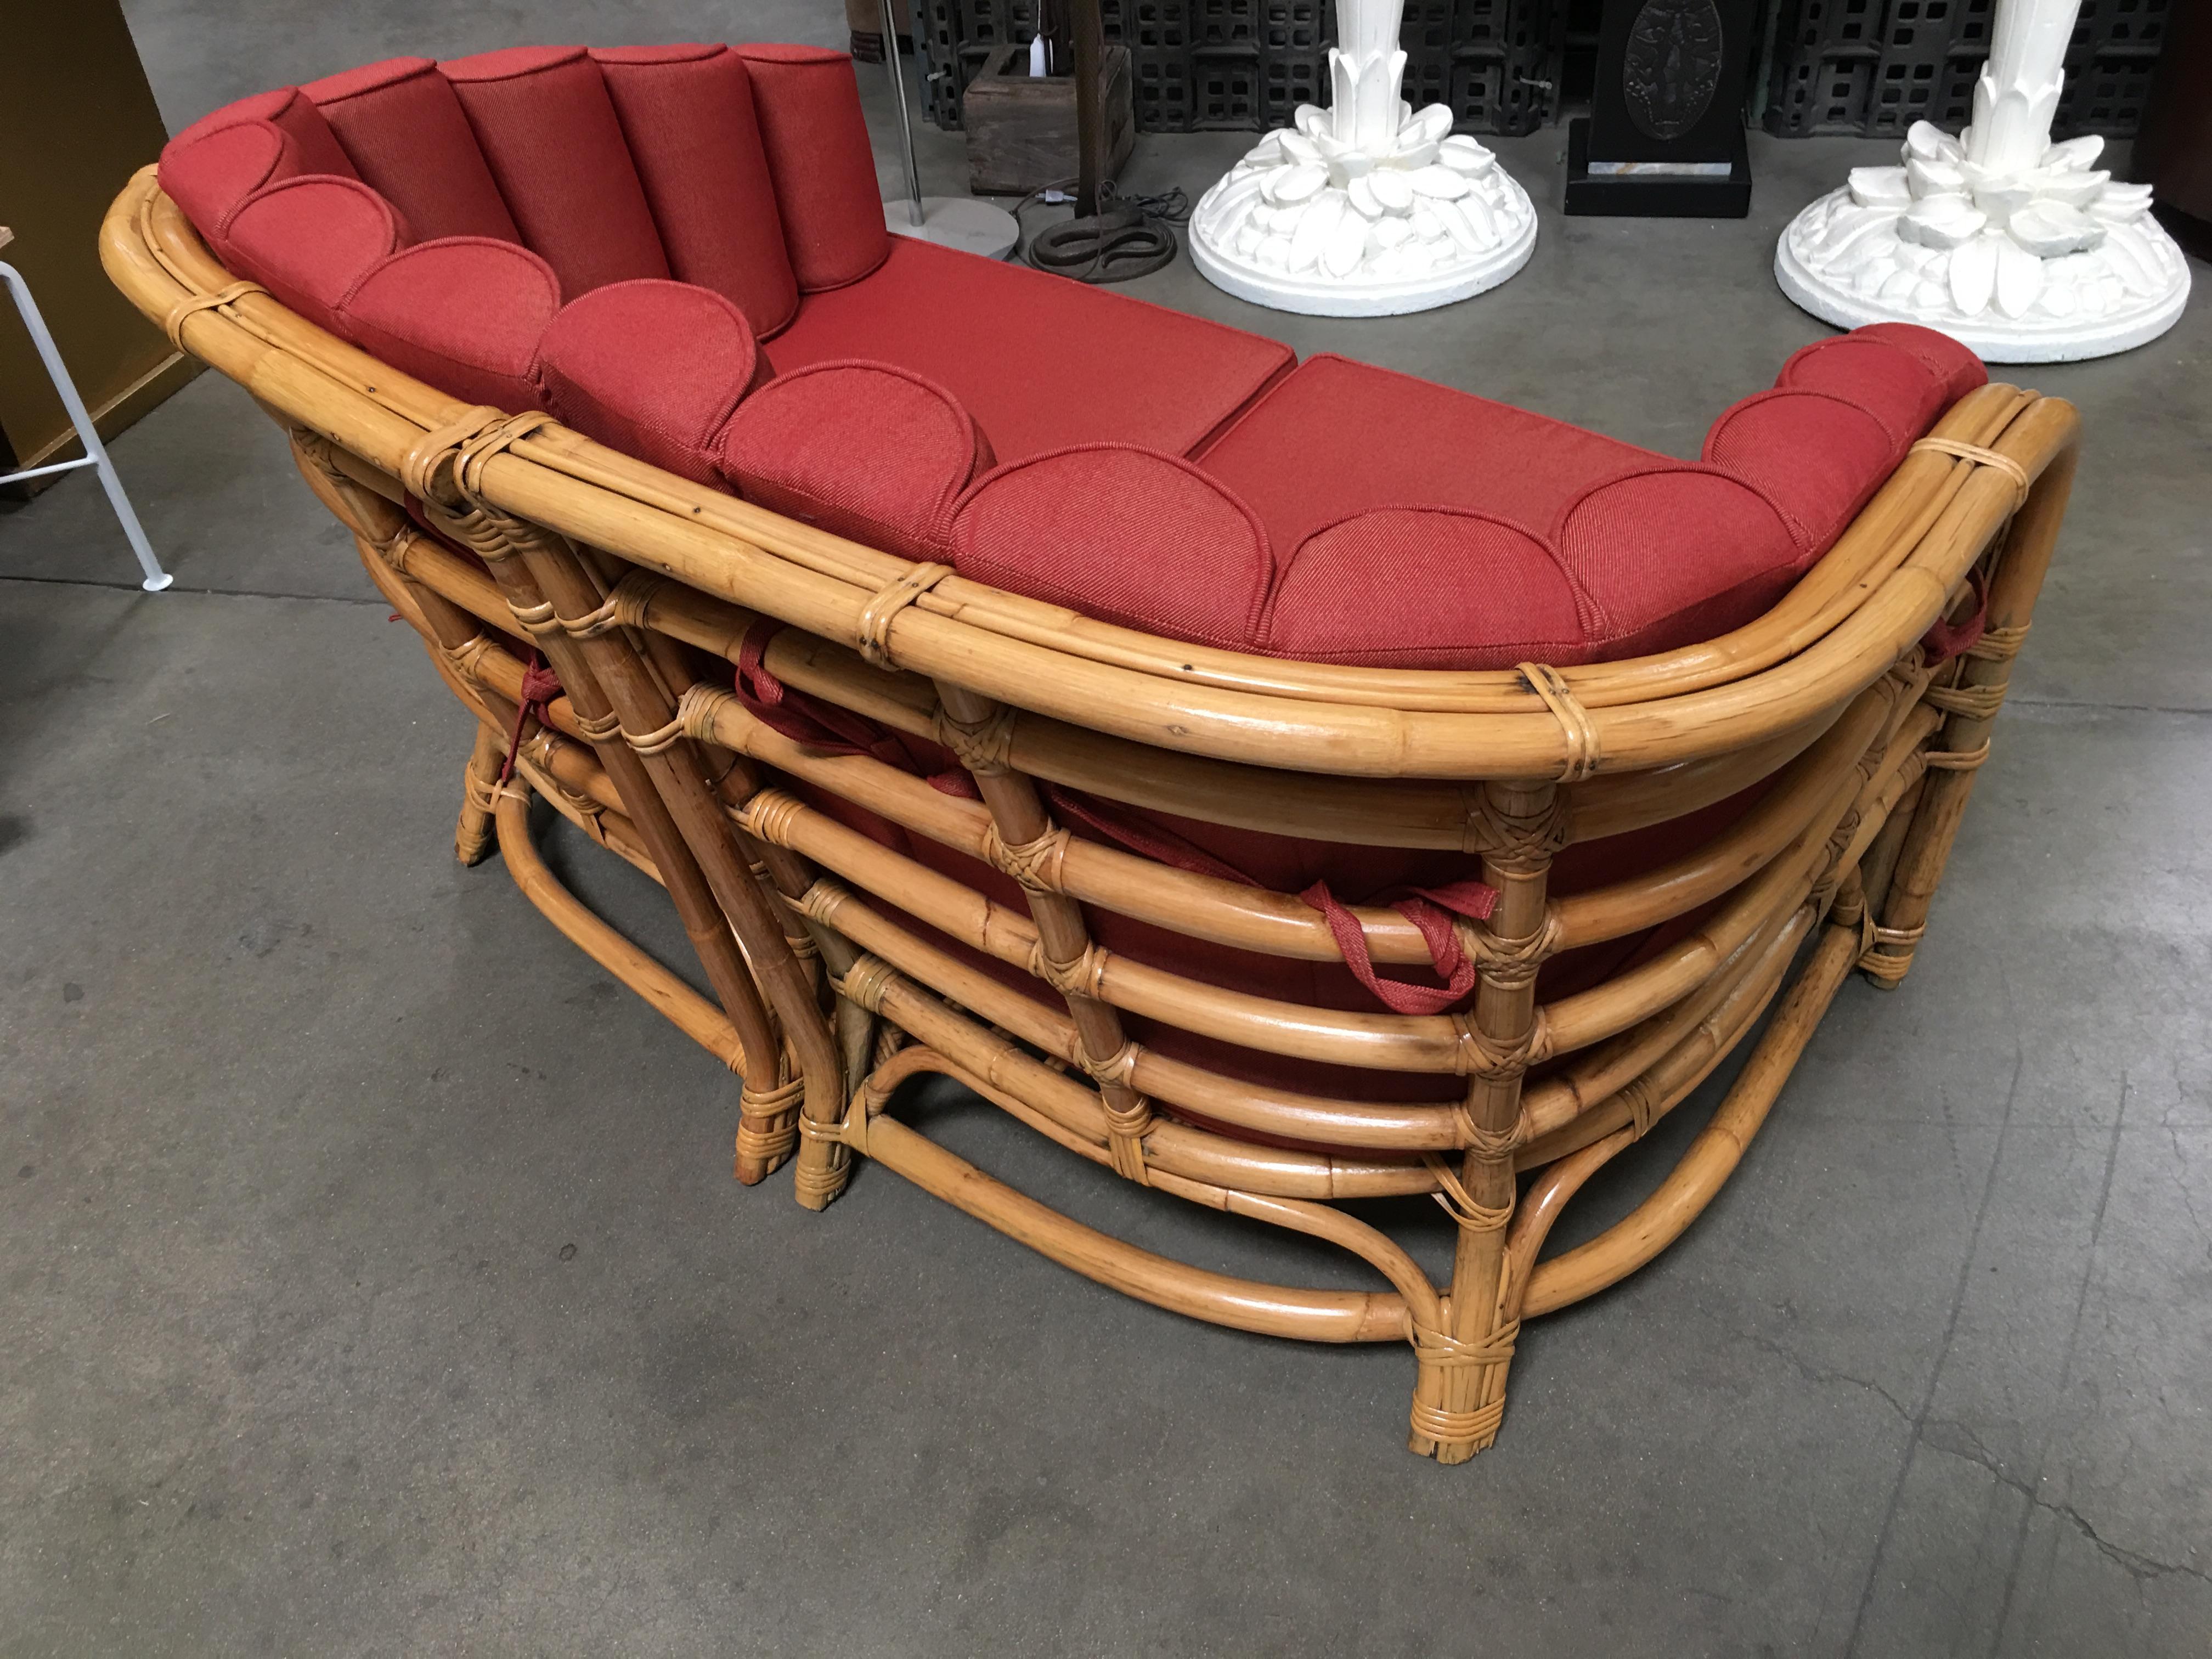 Restored Art Deco Rattan Shell Back Rattan Sectional Loveseat Sofa In Excellent Condition For Sale In Van Nuys, CA